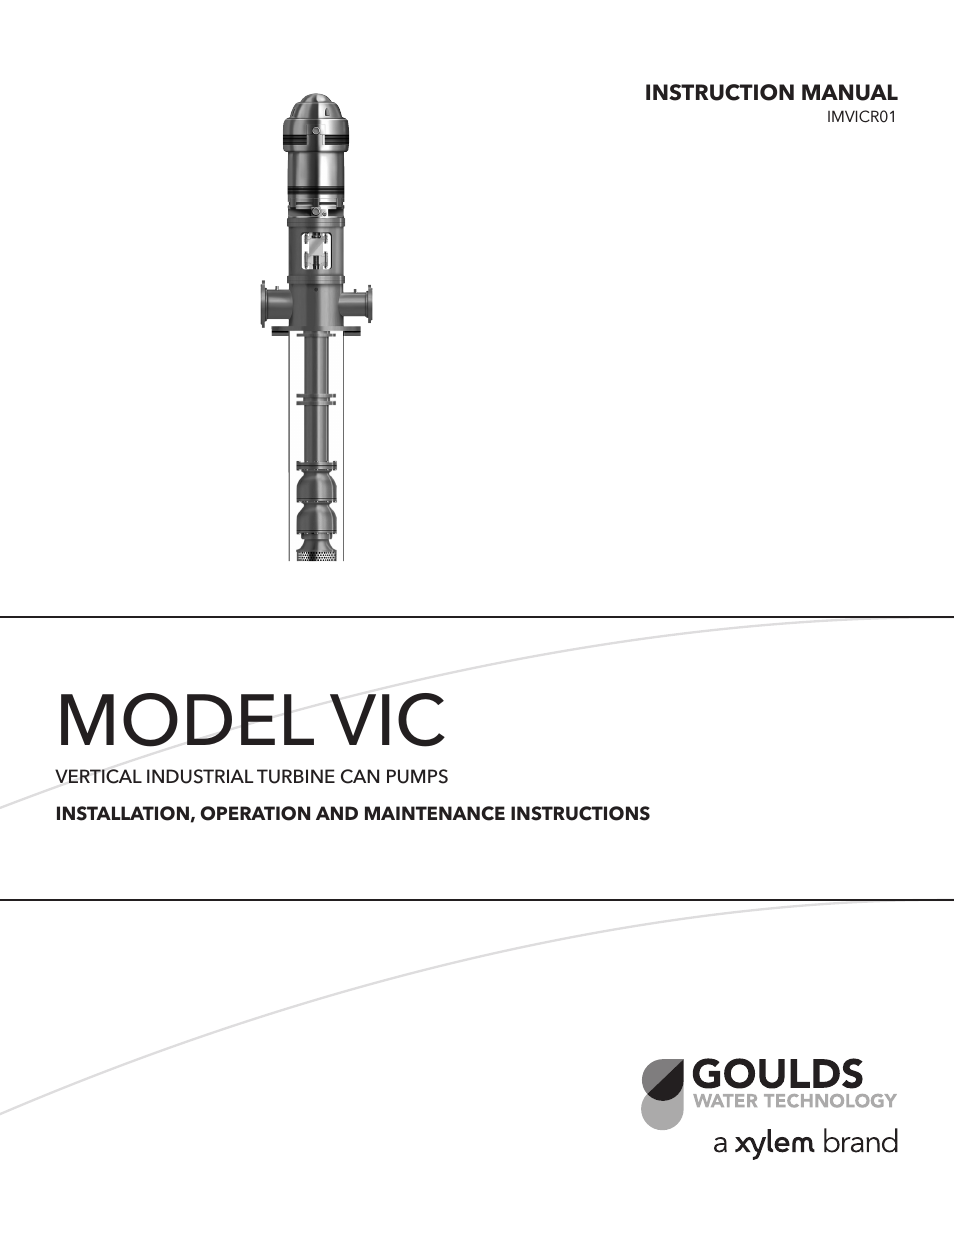 IMVIC R01 Model VIC Vertical Industrial Turbine Can Pumps